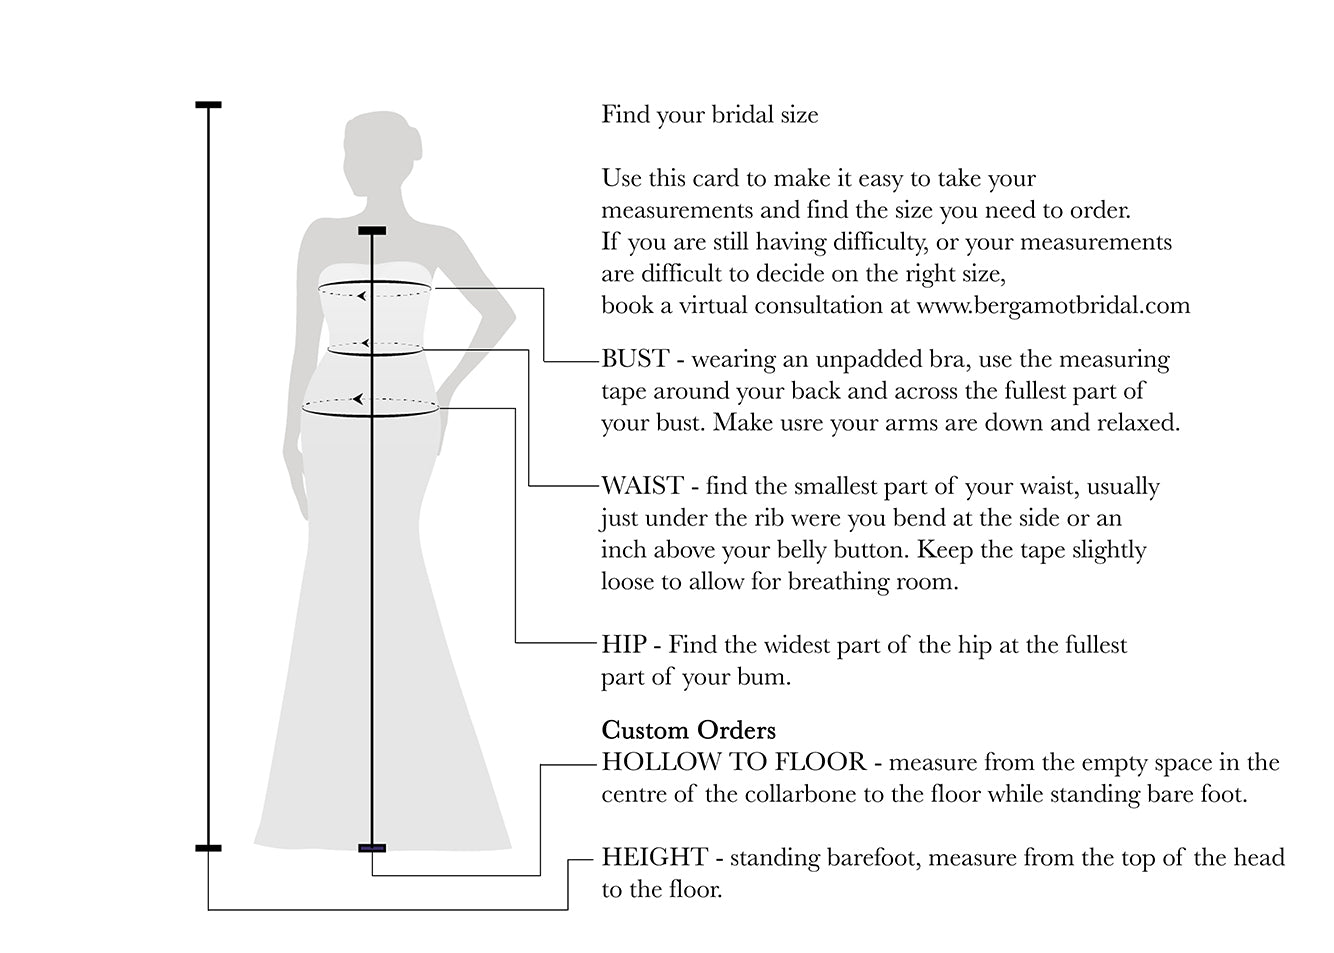 A diagram showing the measurements of the Off-the-Shoulder Romantic Wedding Ball Gown with Glamorous Floral Motifs by Bergamot Bridal.